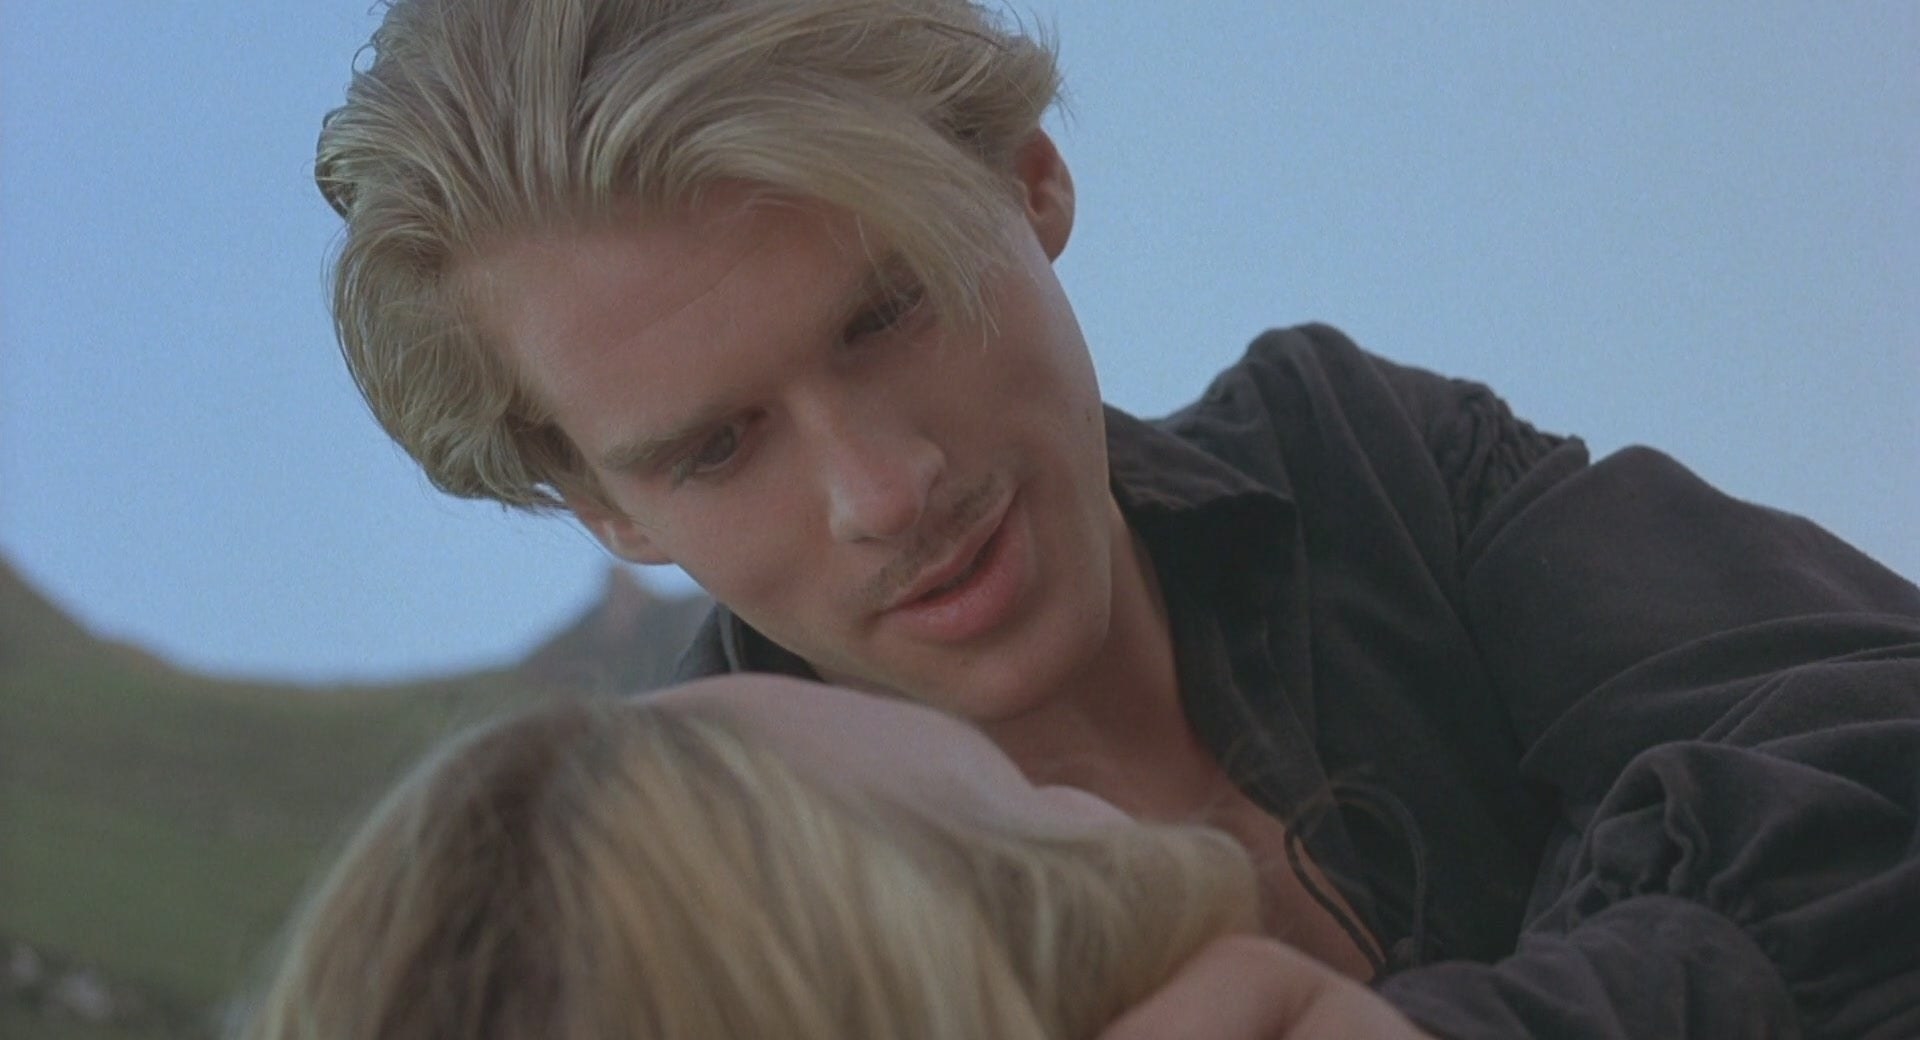 Cary Elwes as Westley and Robin Wright as Buttercup gazing at each in The Princess Bride